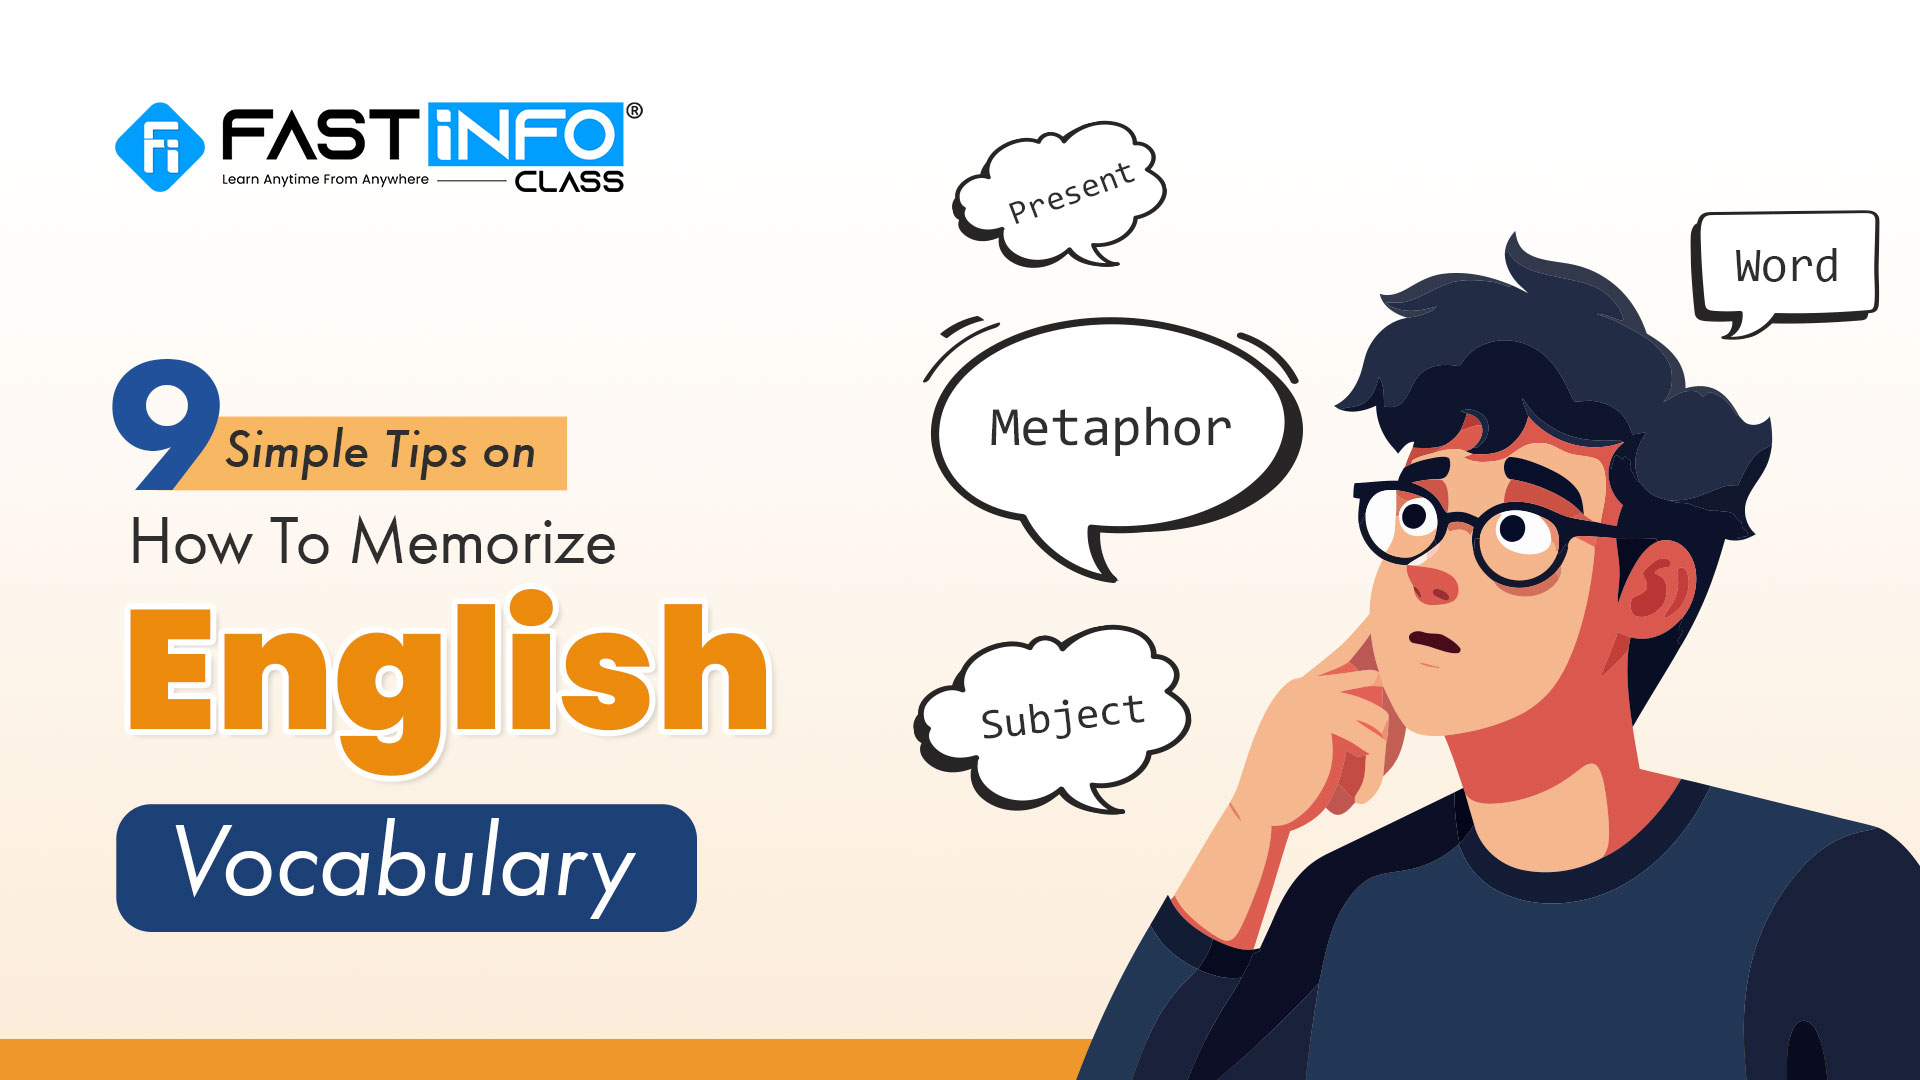 
                    11 Tips and Advanced English Resources To Improve Your English Vocabulary